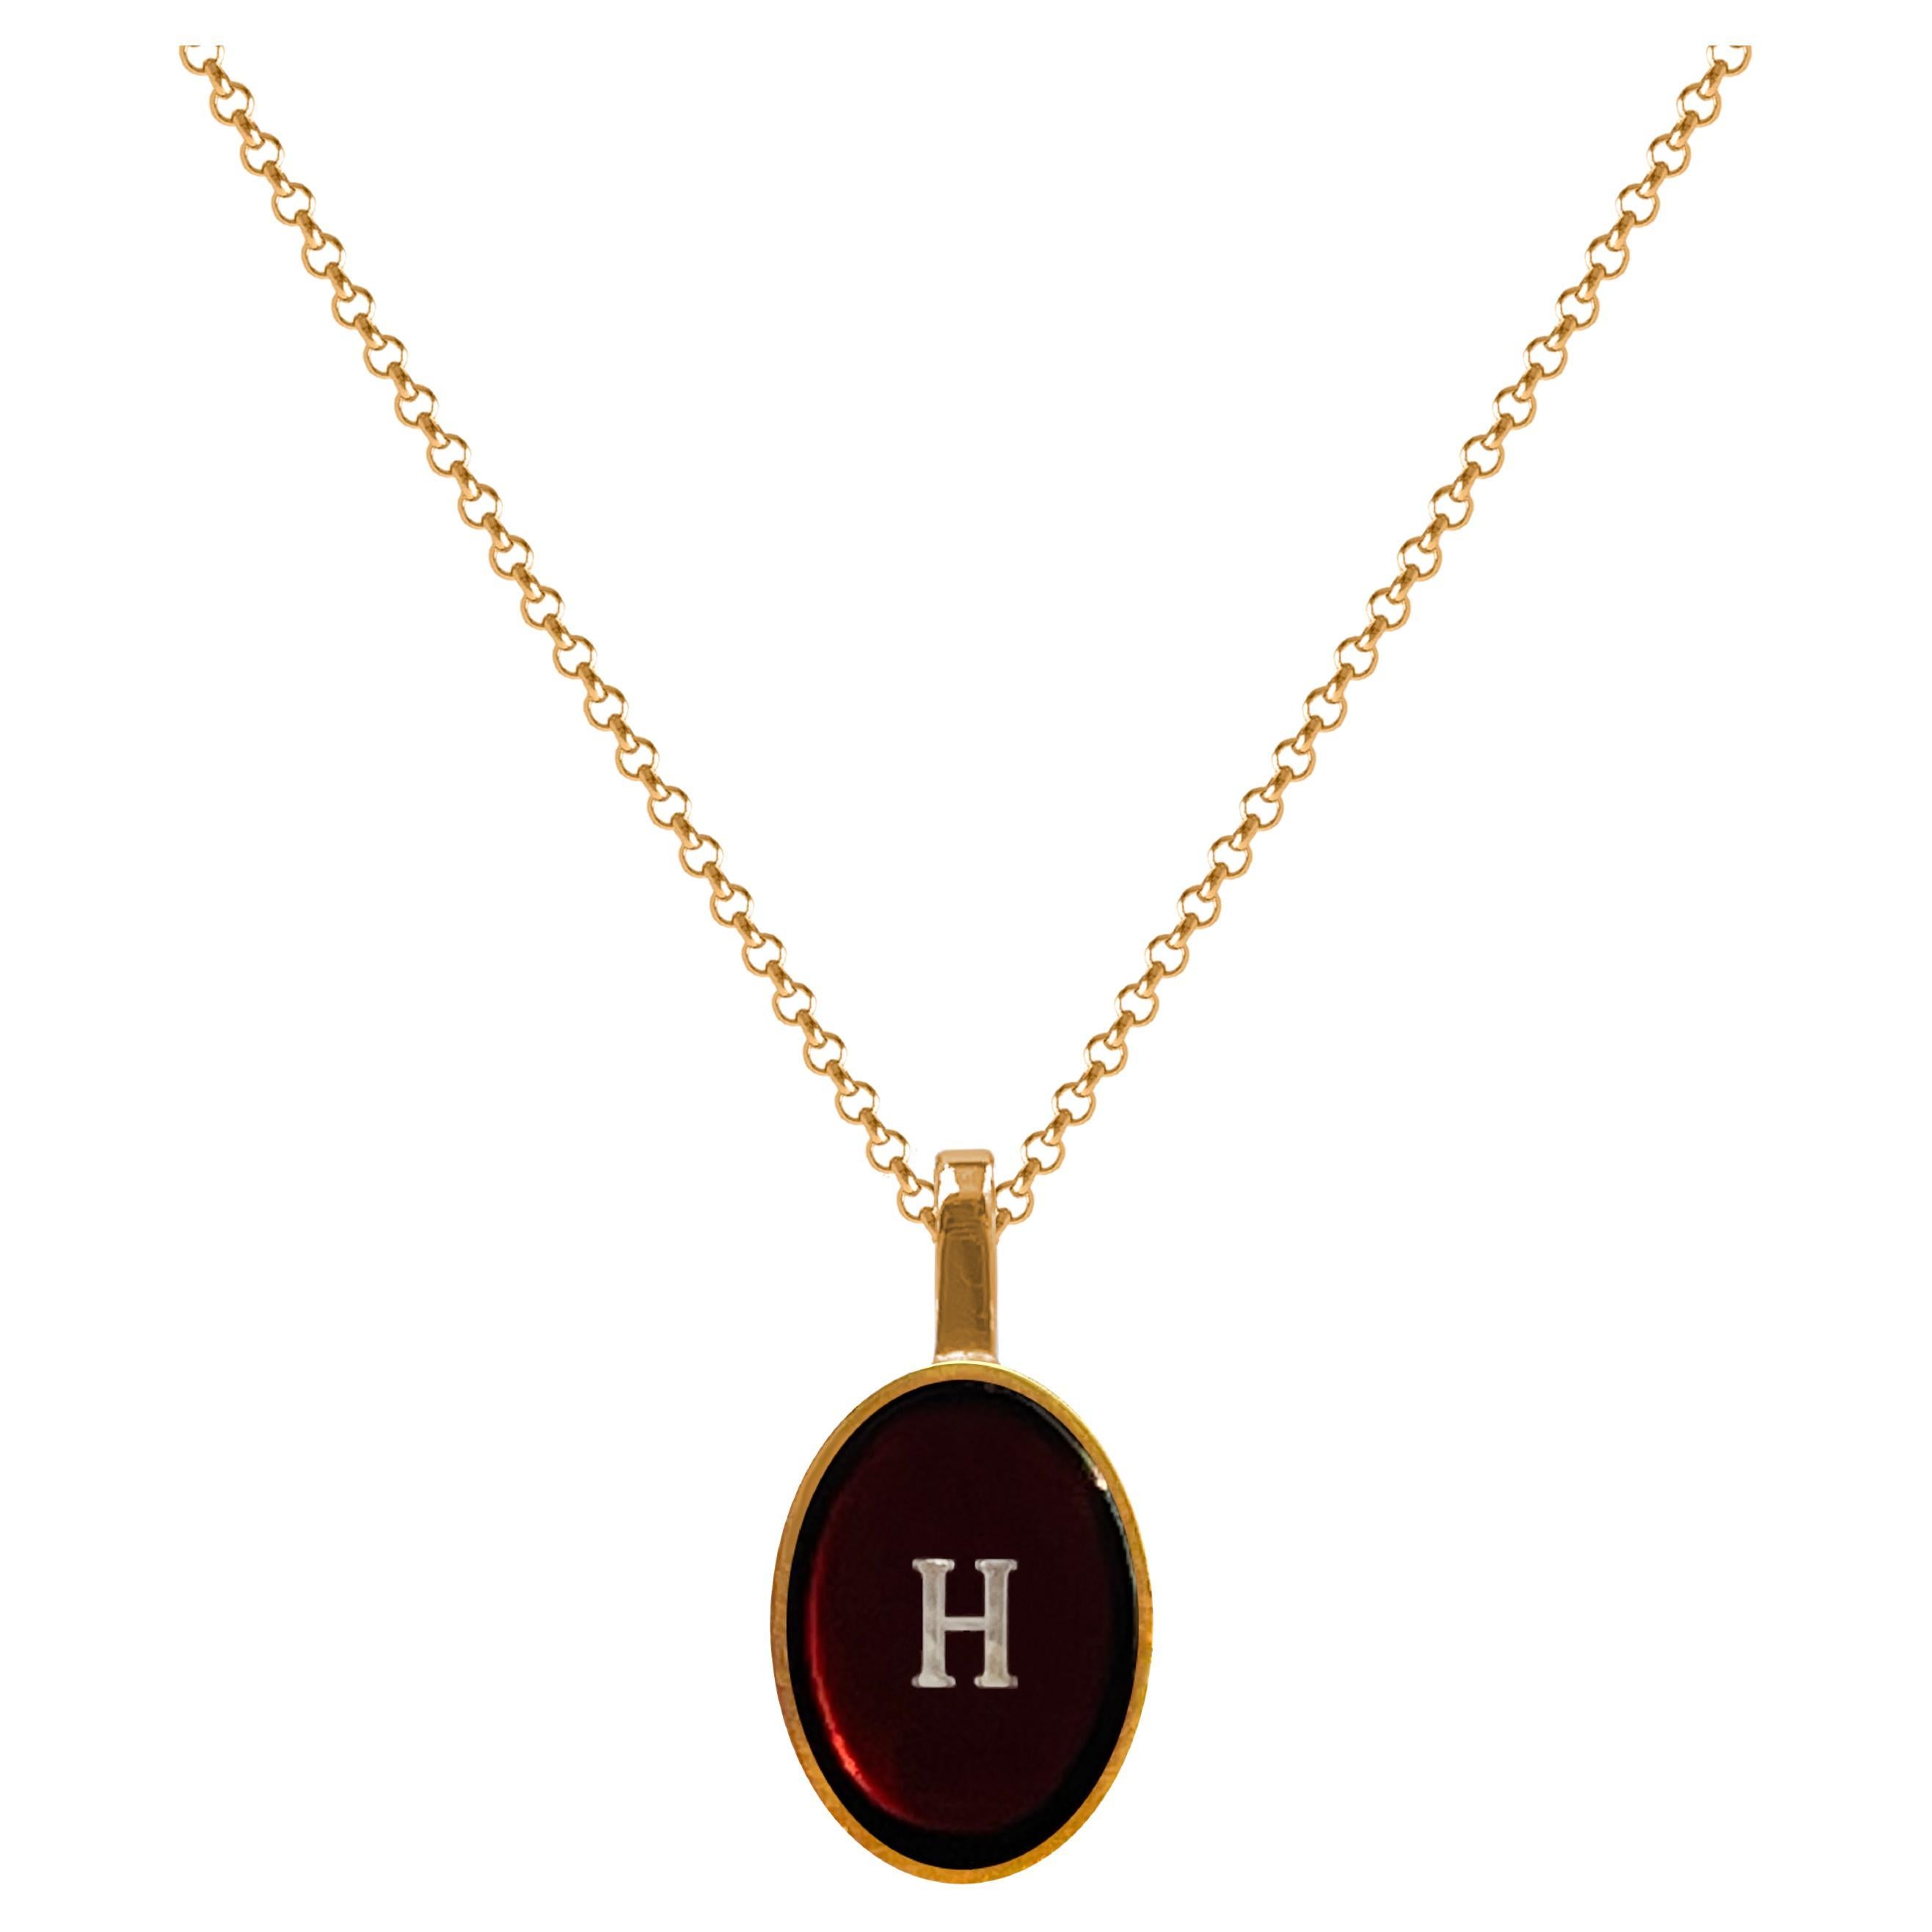 Necklace with amber pendant and name letter gold - H